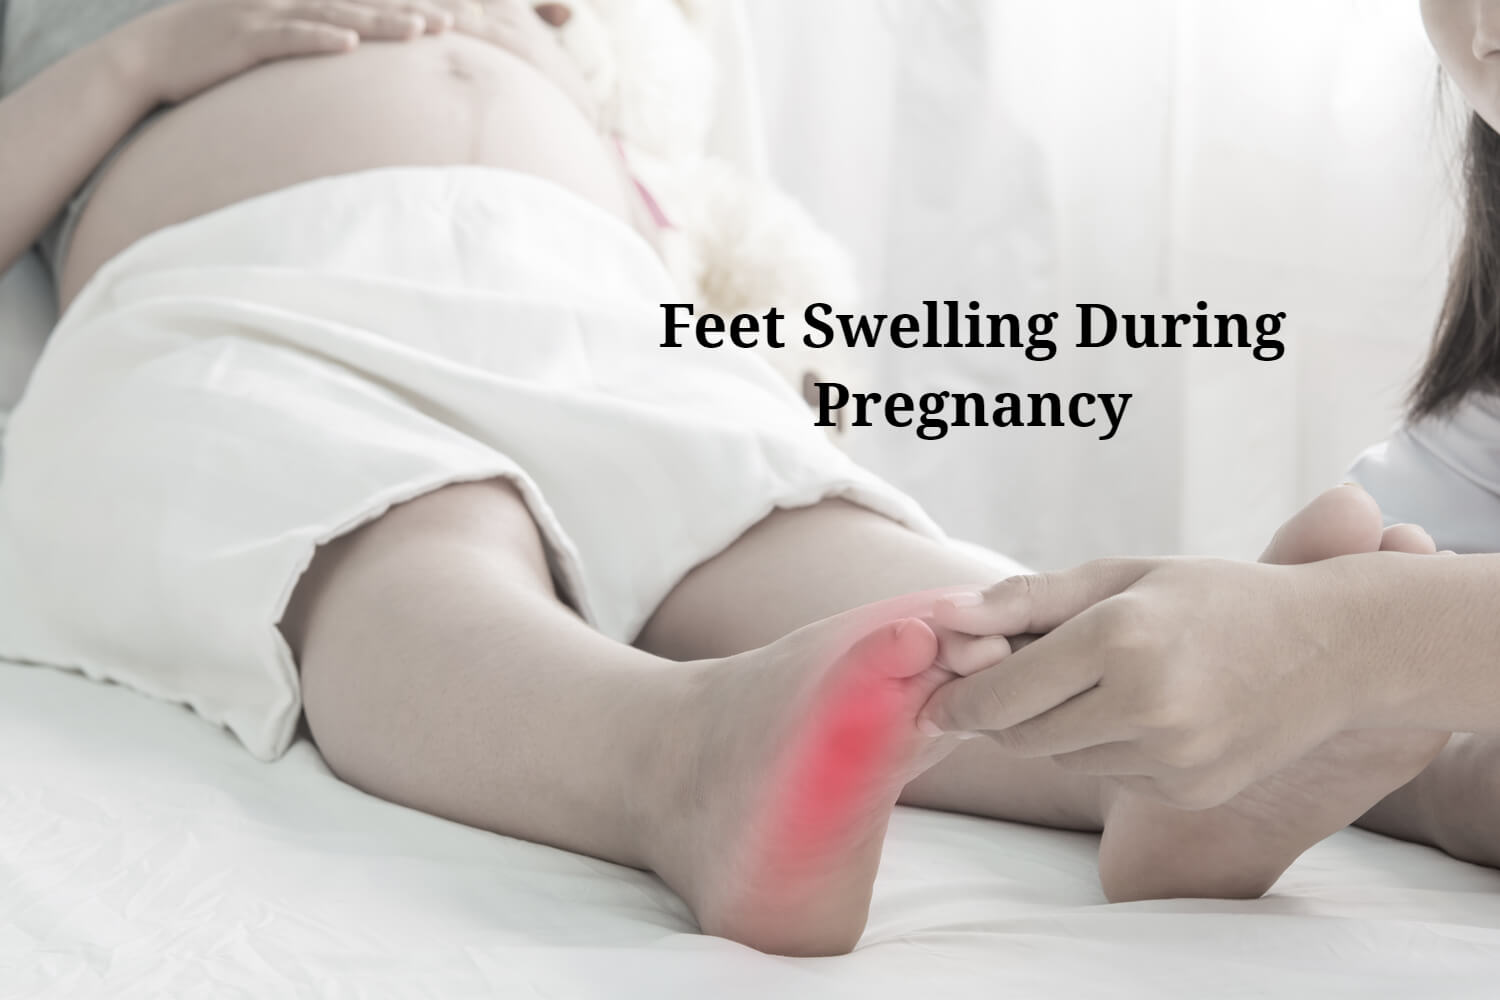 Feet Swelling During Pregnancy